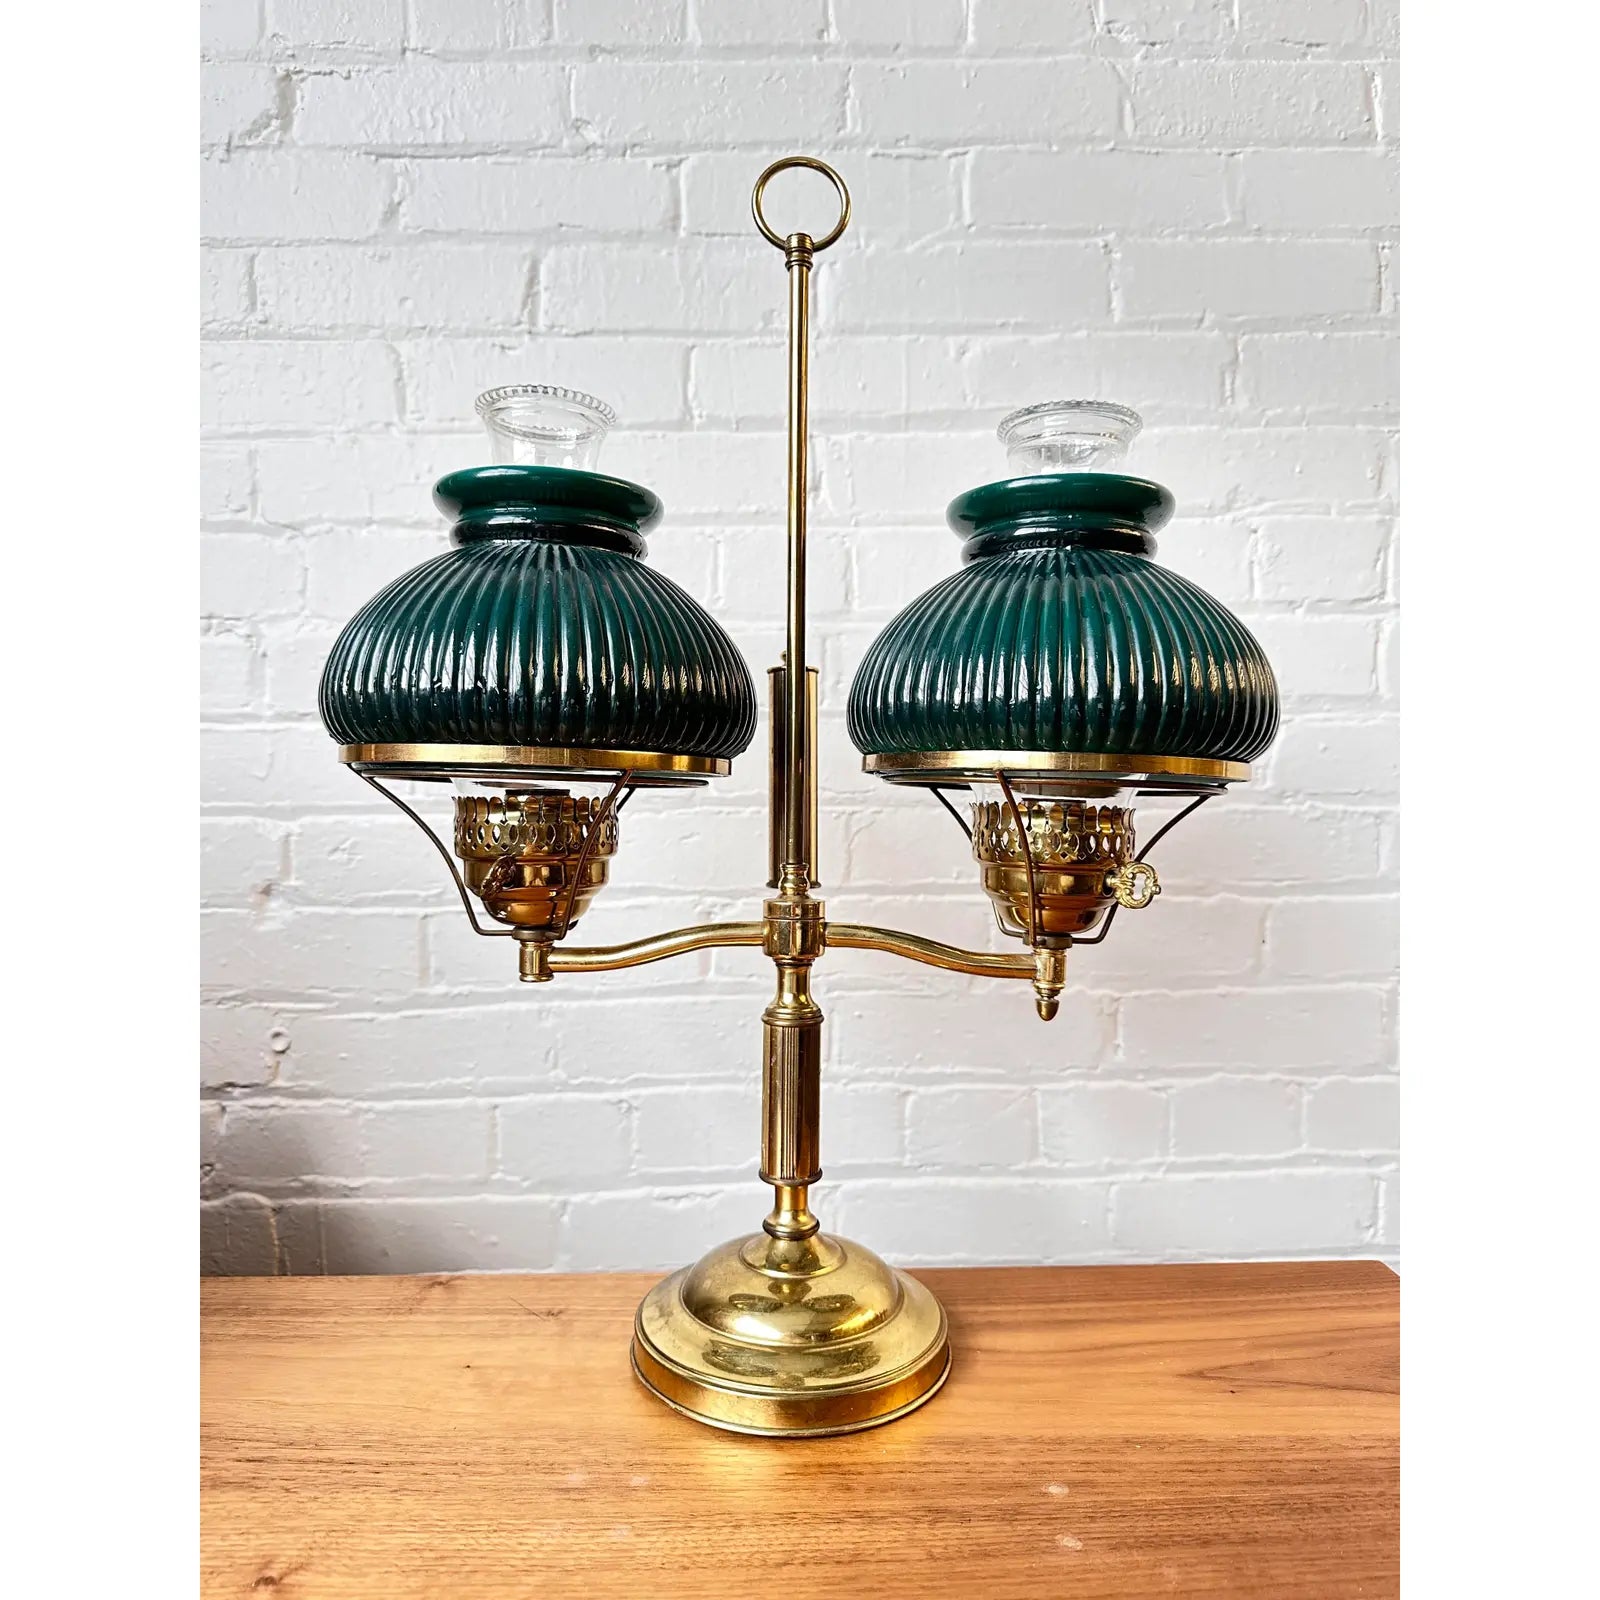 Classic vintage ministerial lamp in polished brass green glass